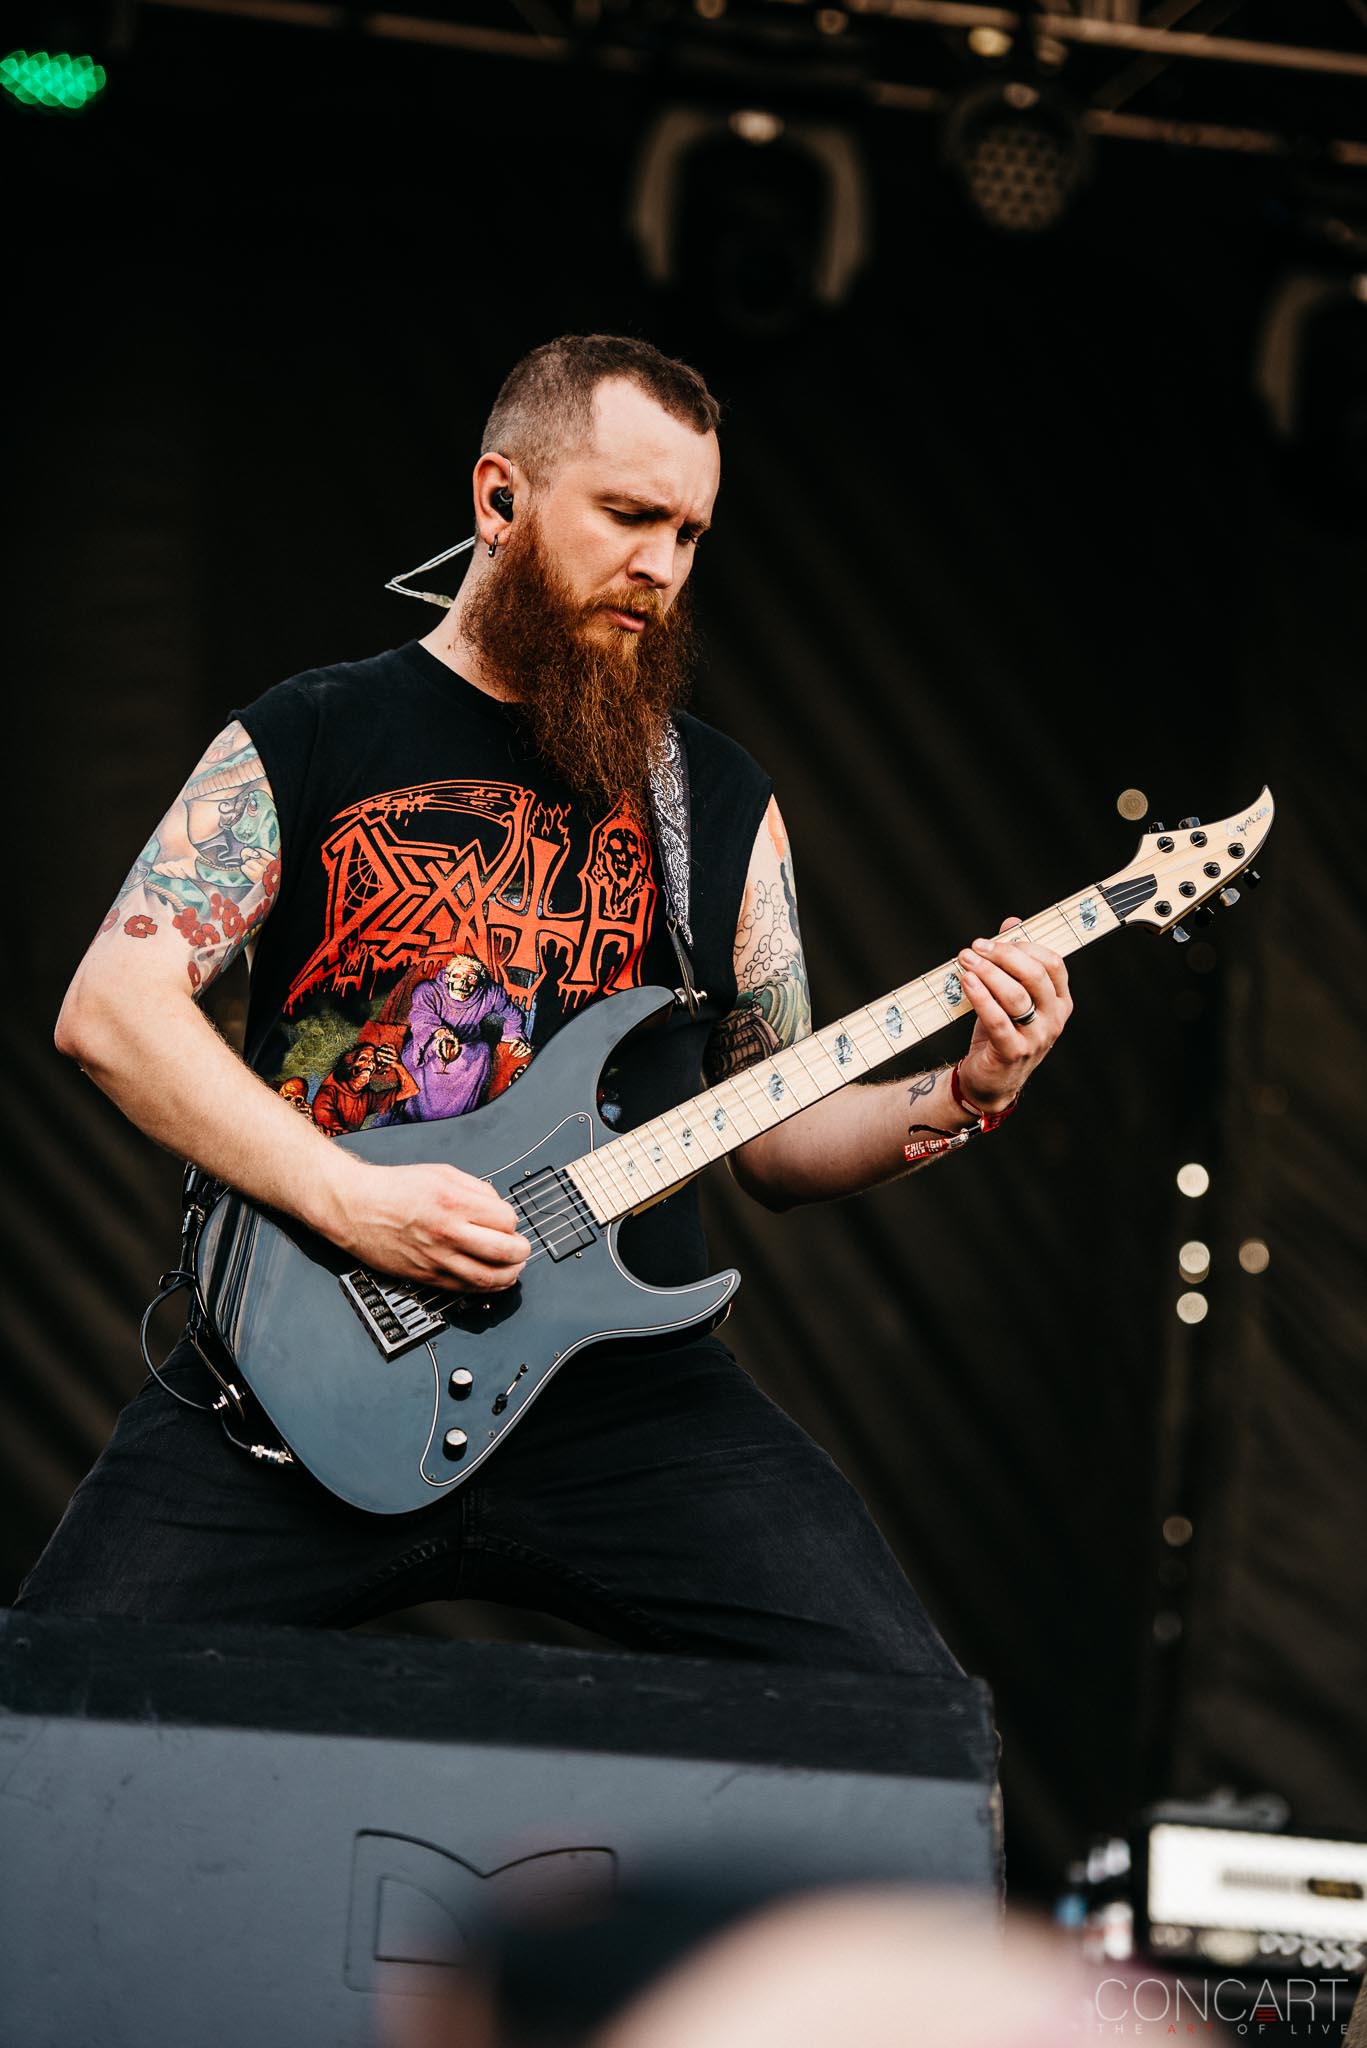 Concert Photos: Killswitch Engage @ Chicago Open Air 2016 | conc.art ...